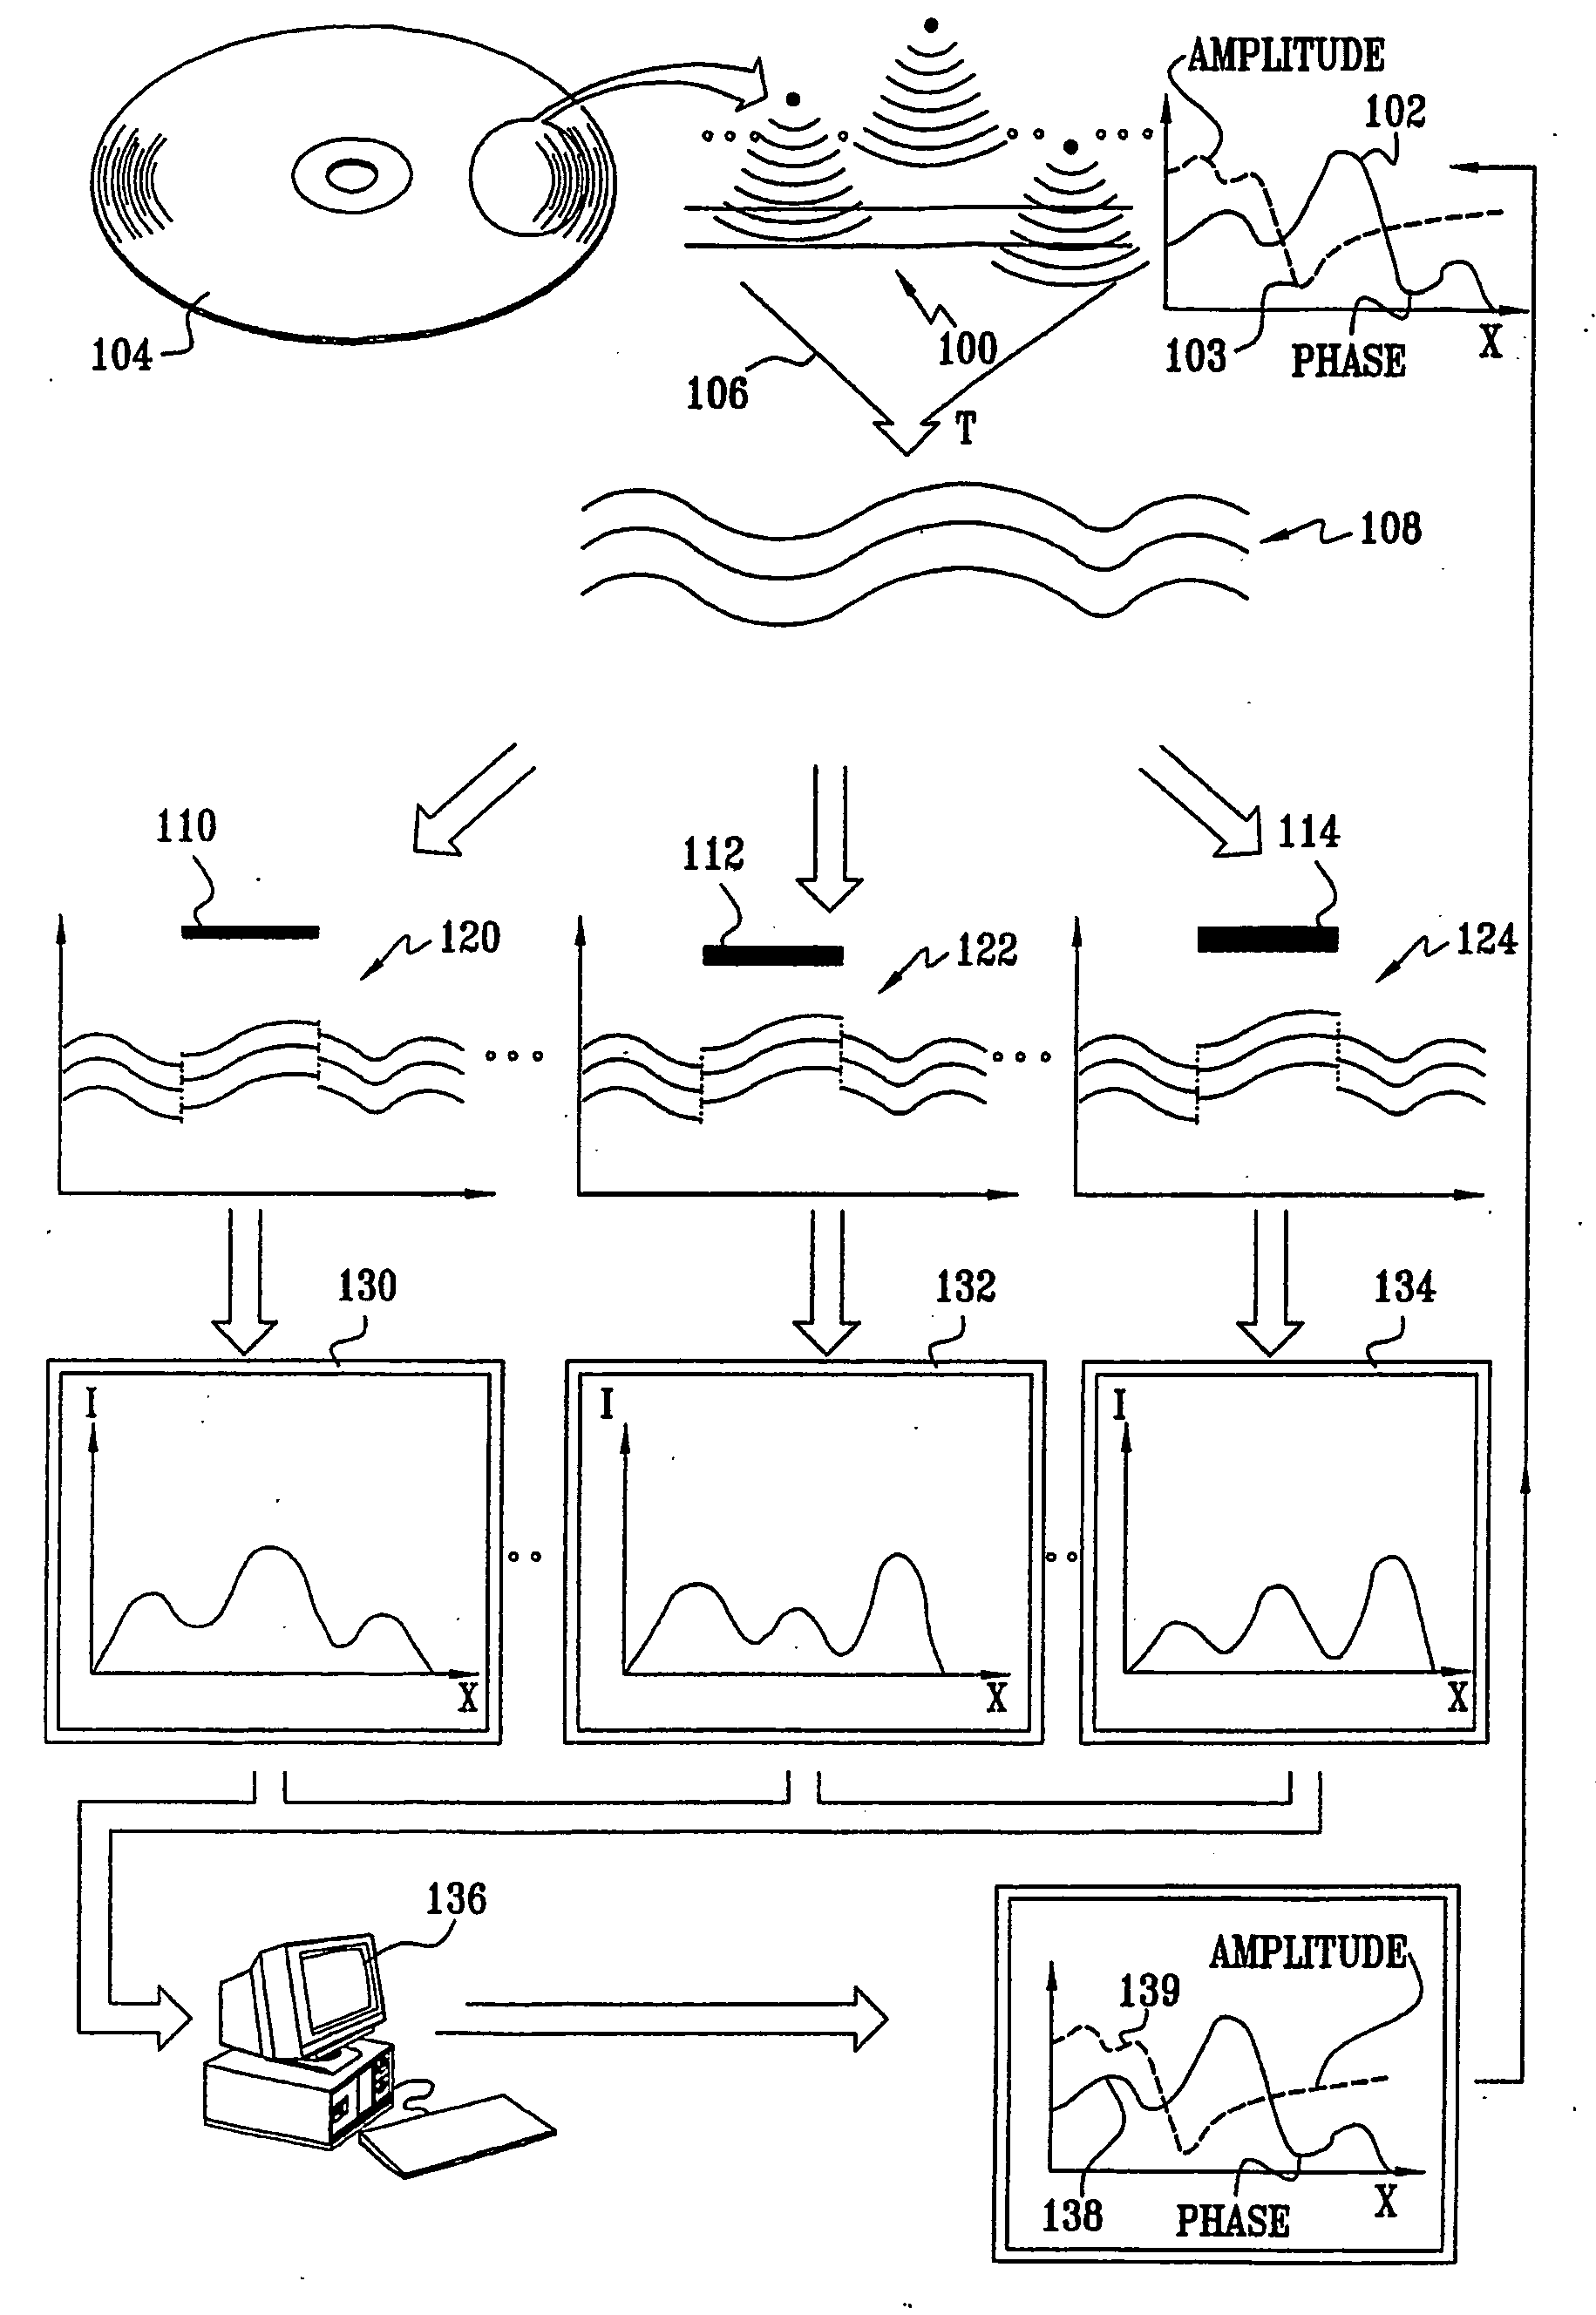 Methods and apparatus for wavefront manipulations and improved 3-D measurements